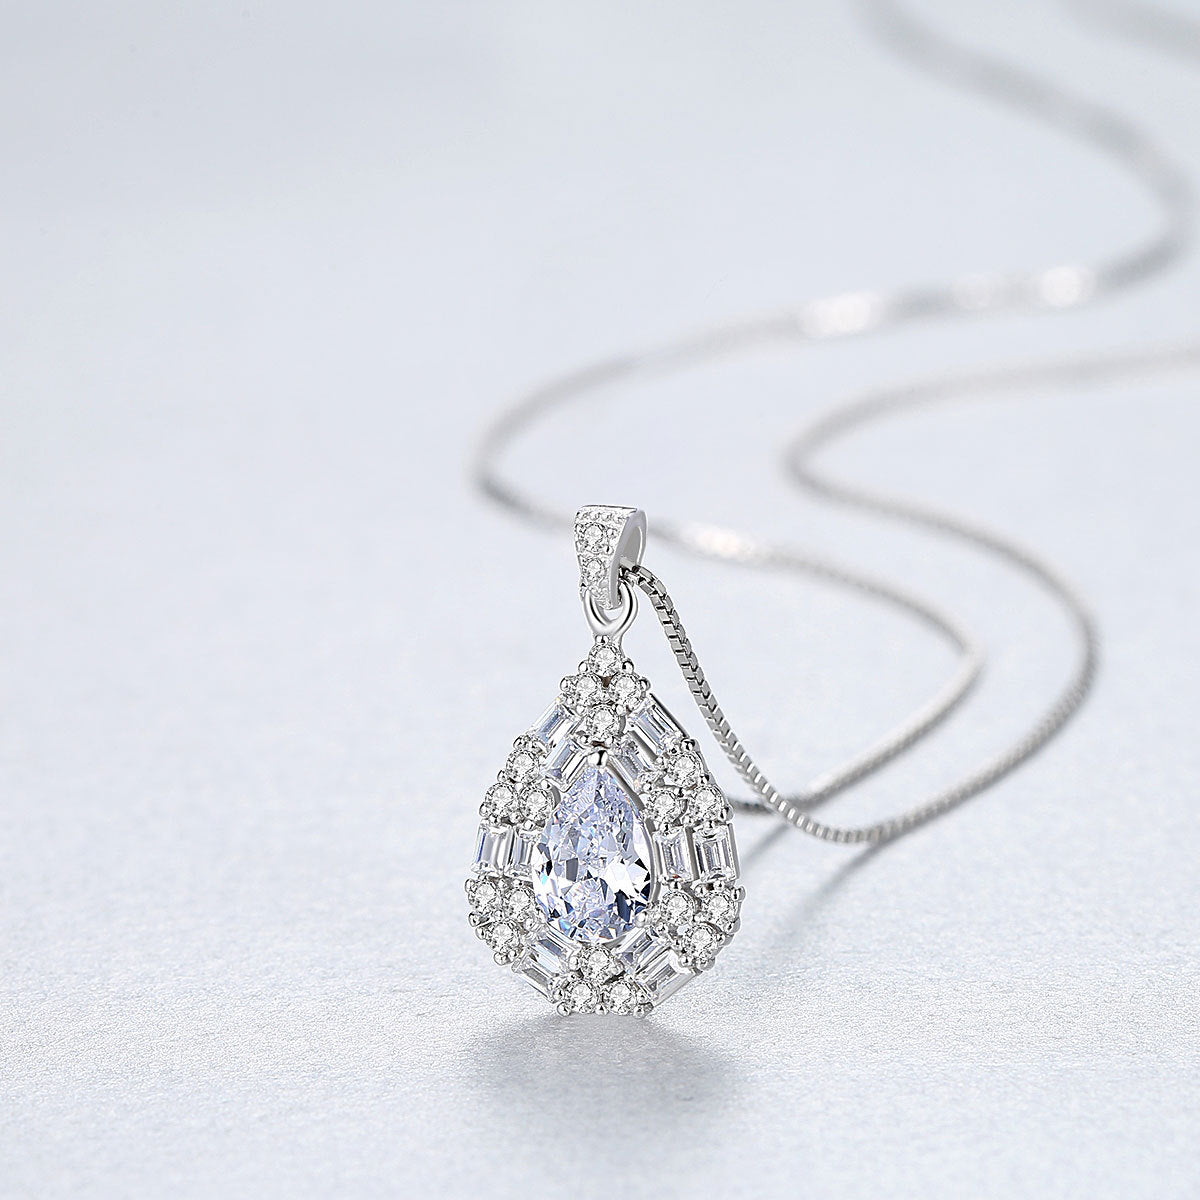 Gemstonely- S925 Silver Necklace with Micro-Inlaid Zircon Pendant for Women in a Fashionable and Versatile Design